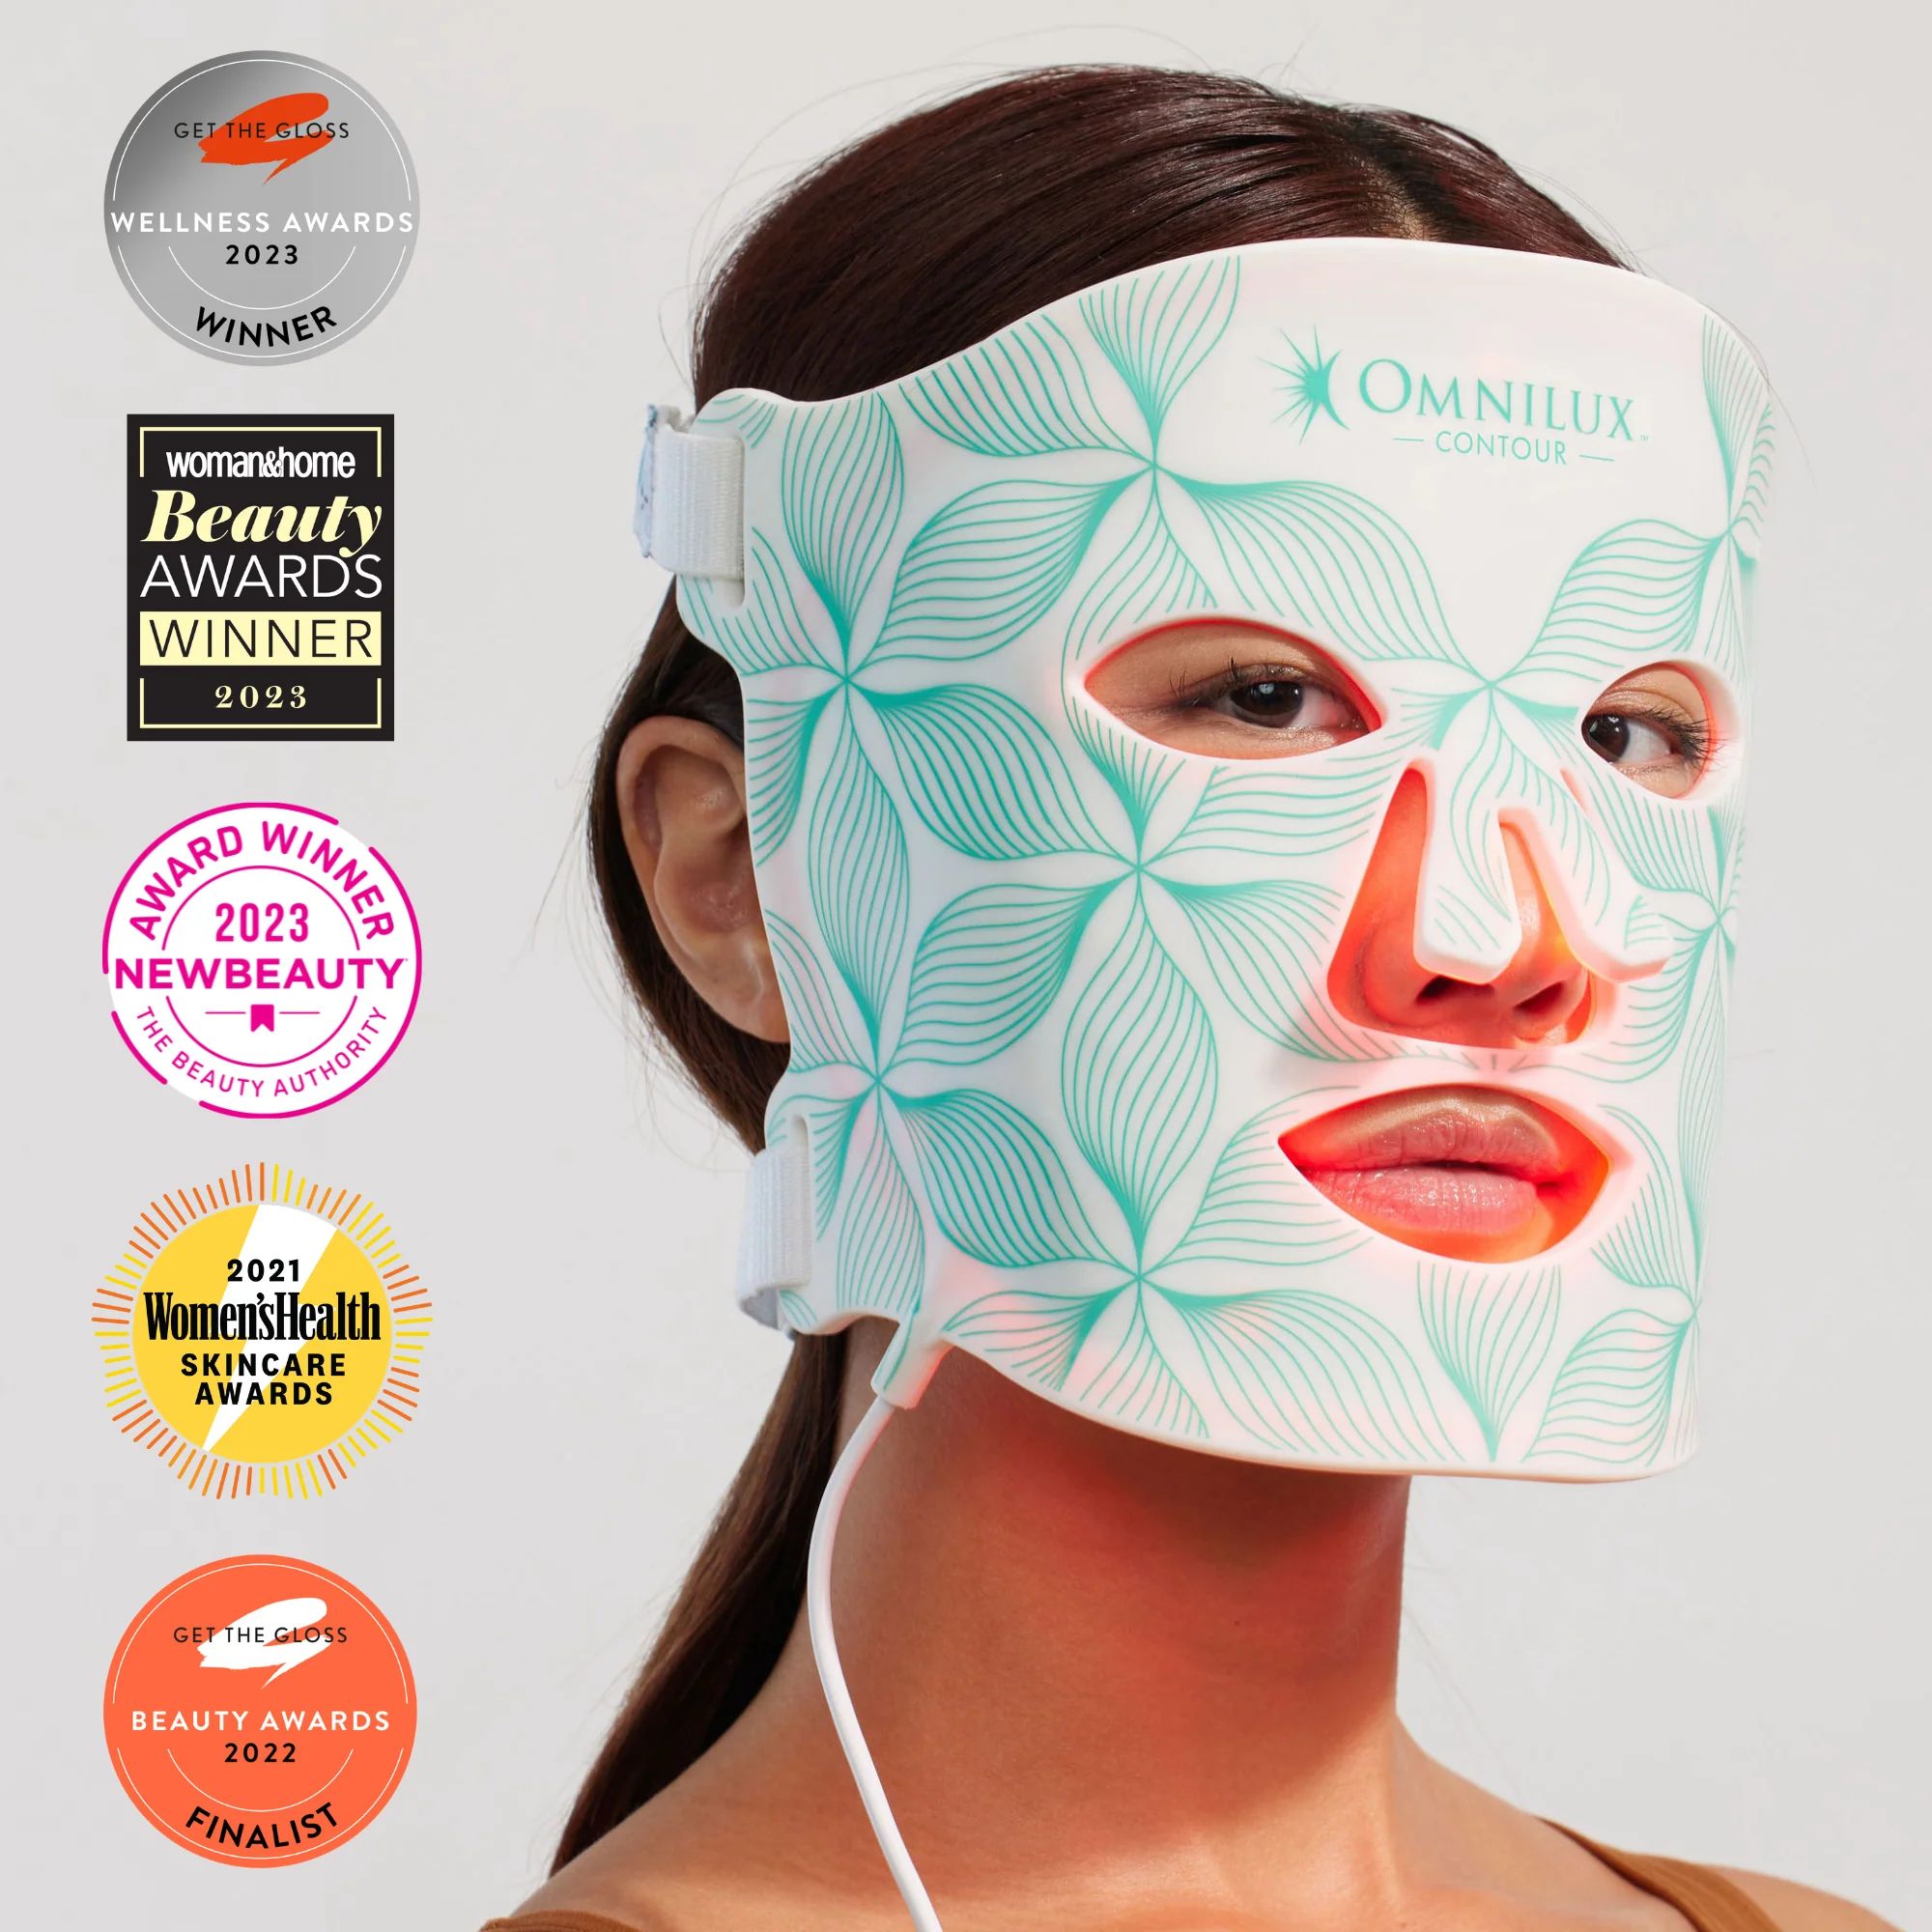 Omnilux Contour Face
            
                          
               
 4.8 Rated 4.8 out o... | Omnilux LED